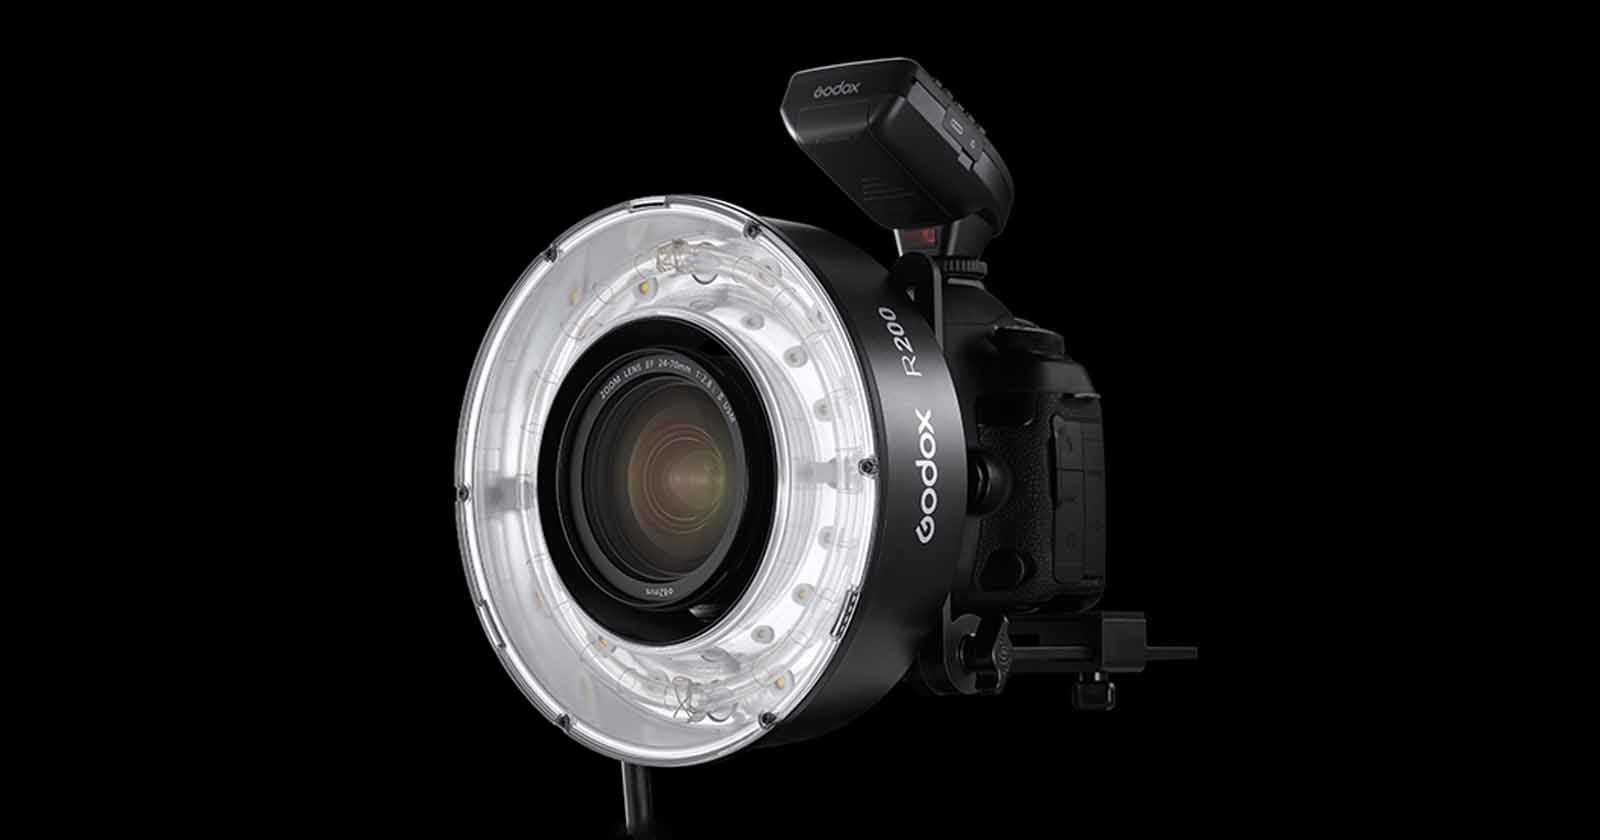 Godoxs New R200 Ring Flash is a Lighter, Lower-Power Alternative